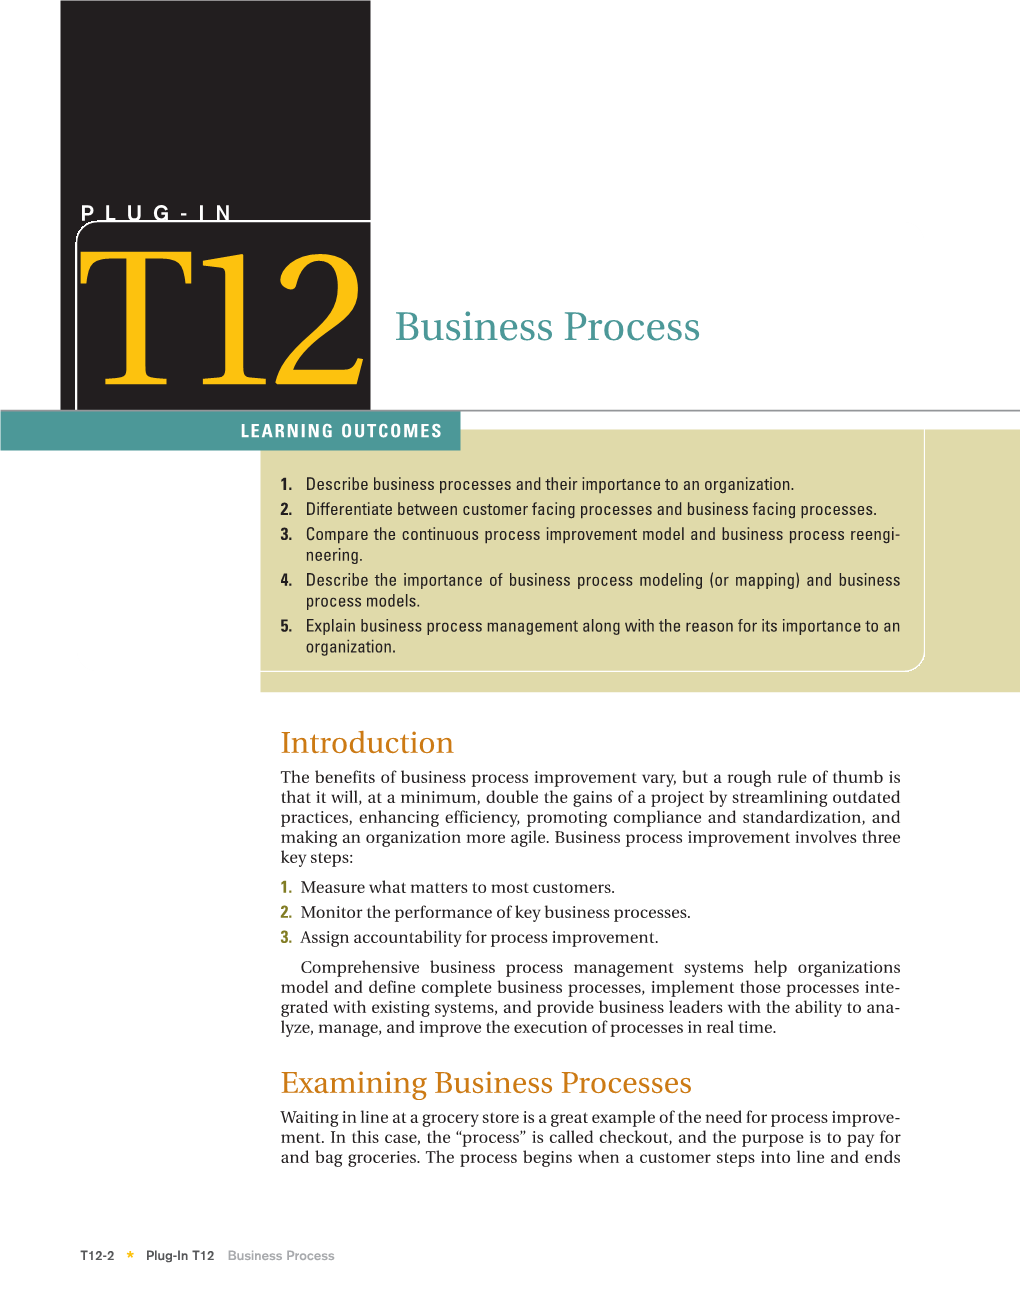 Business Process Management Along with the Reason for Its Importance to an Organization